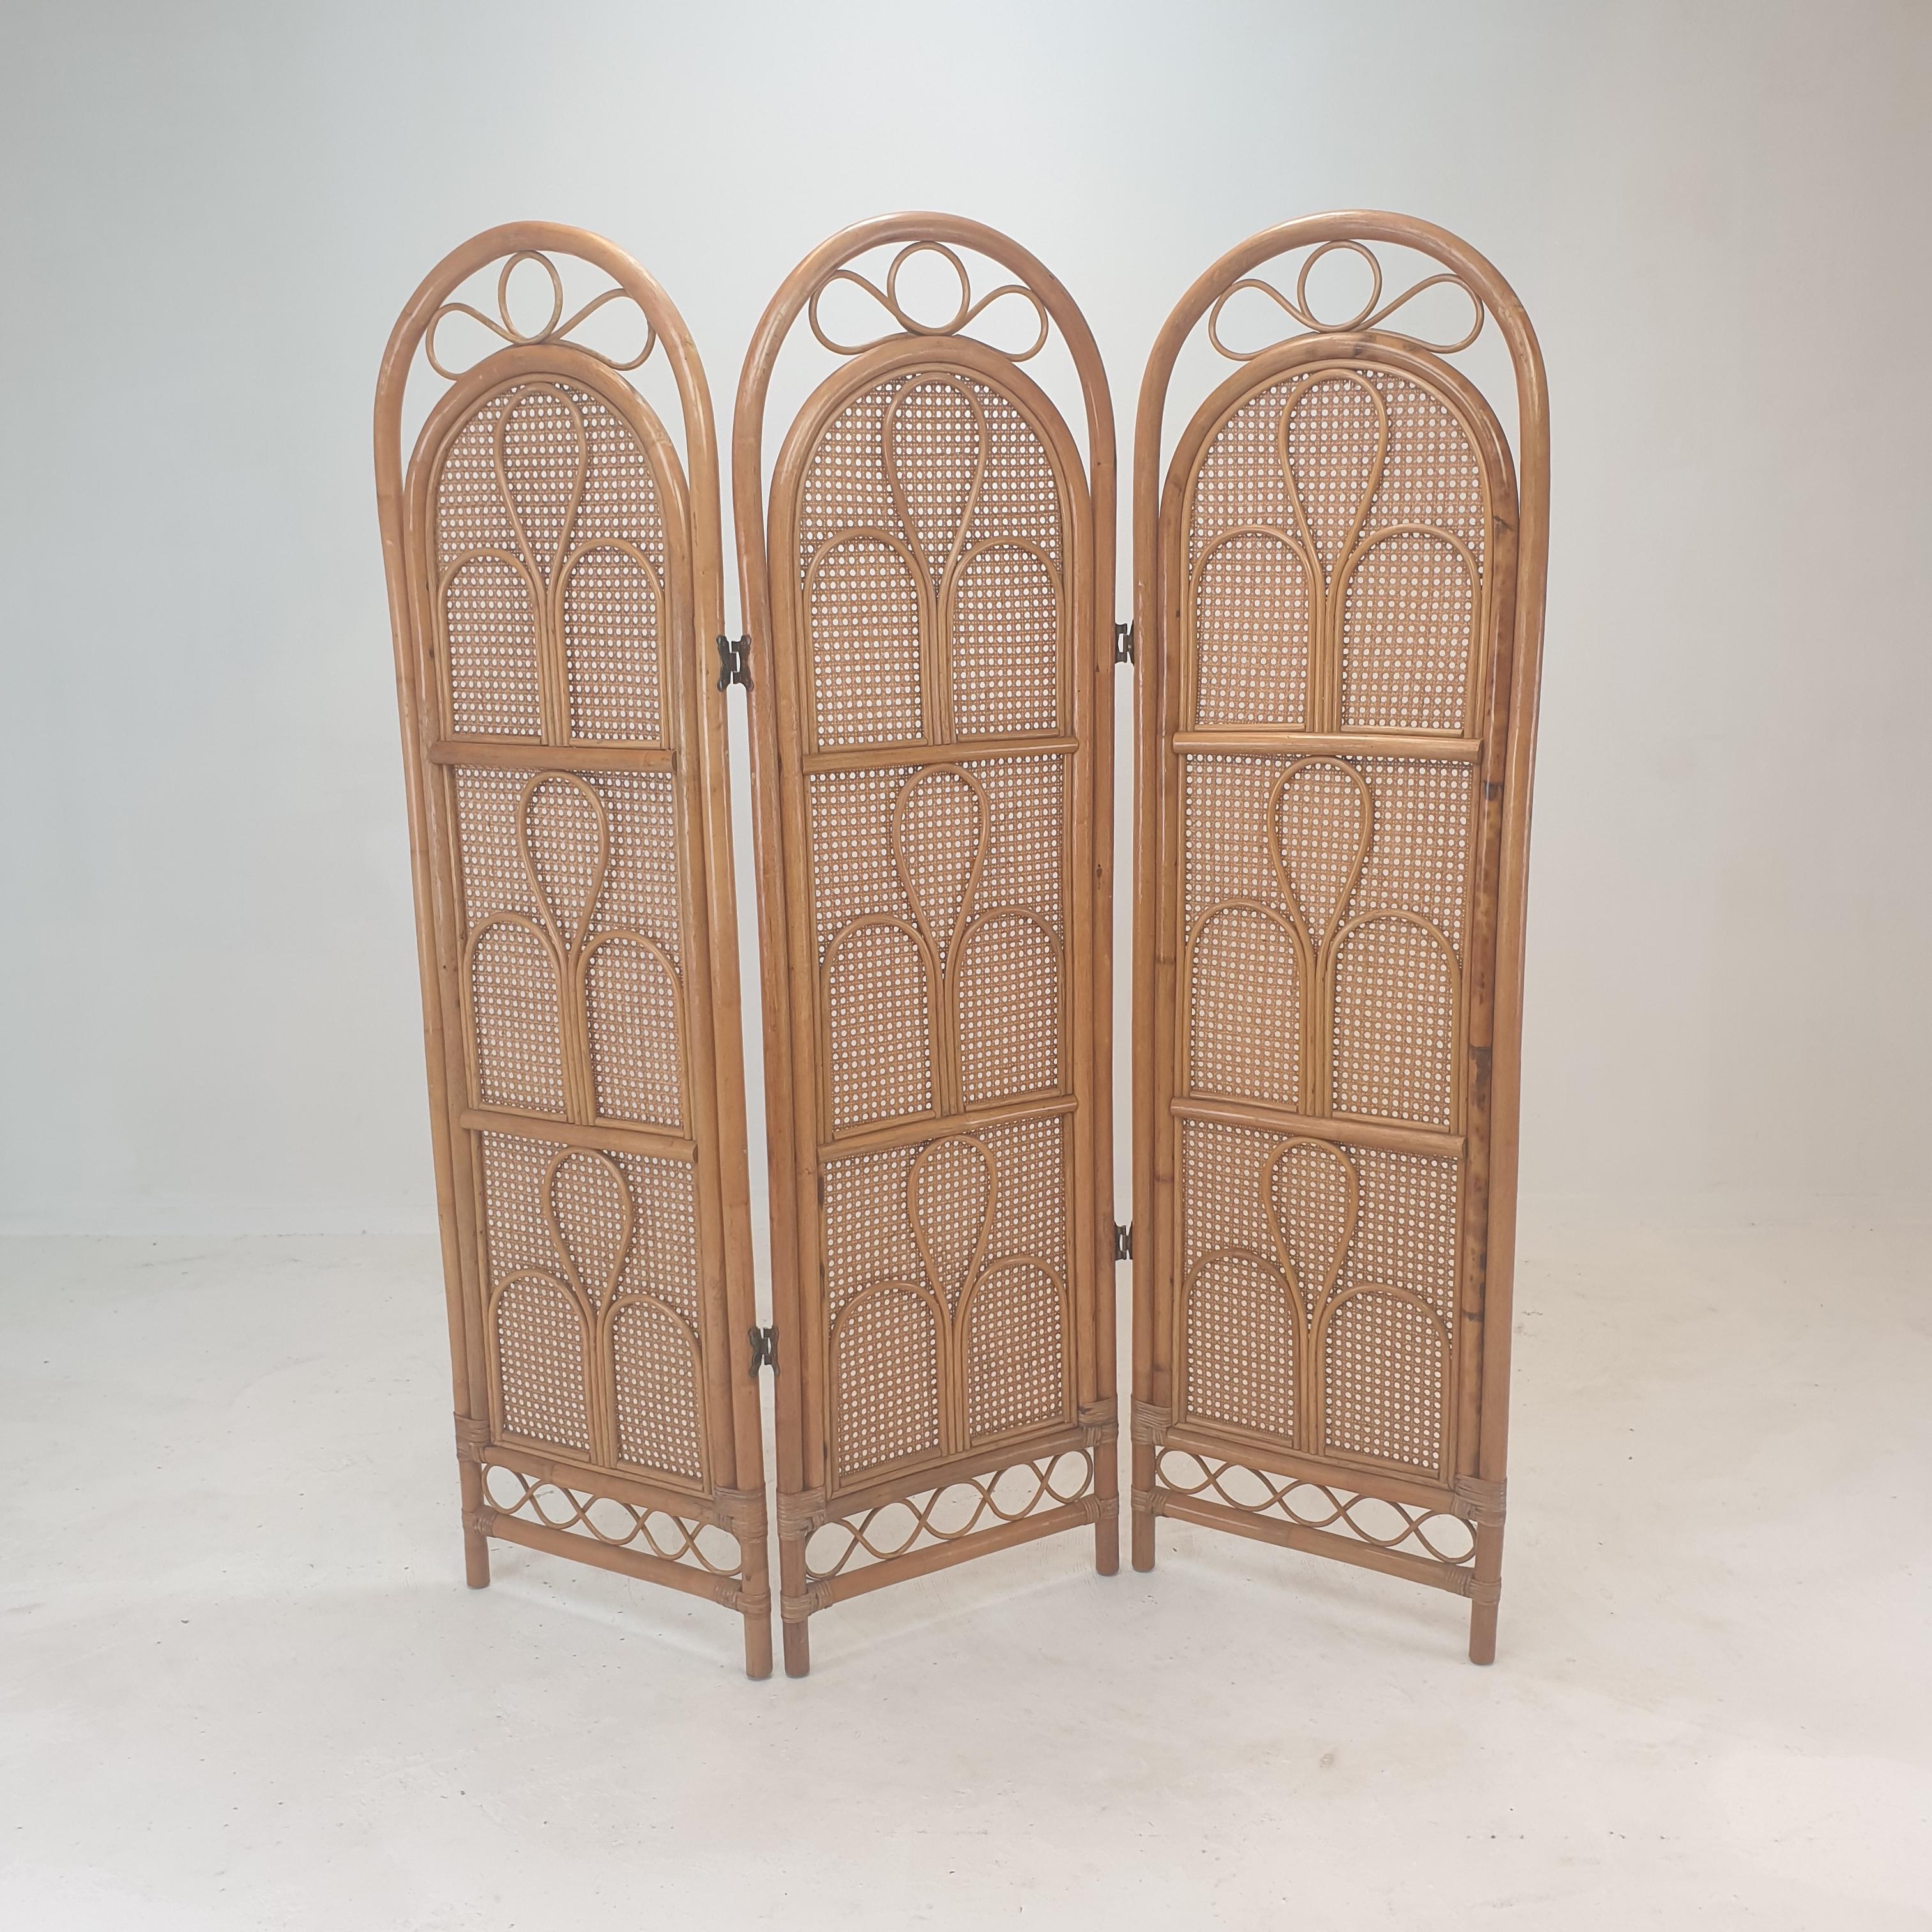 Mid-Century Modern Italian Room Divider in Rattan and Wicker, 1960s For Sale